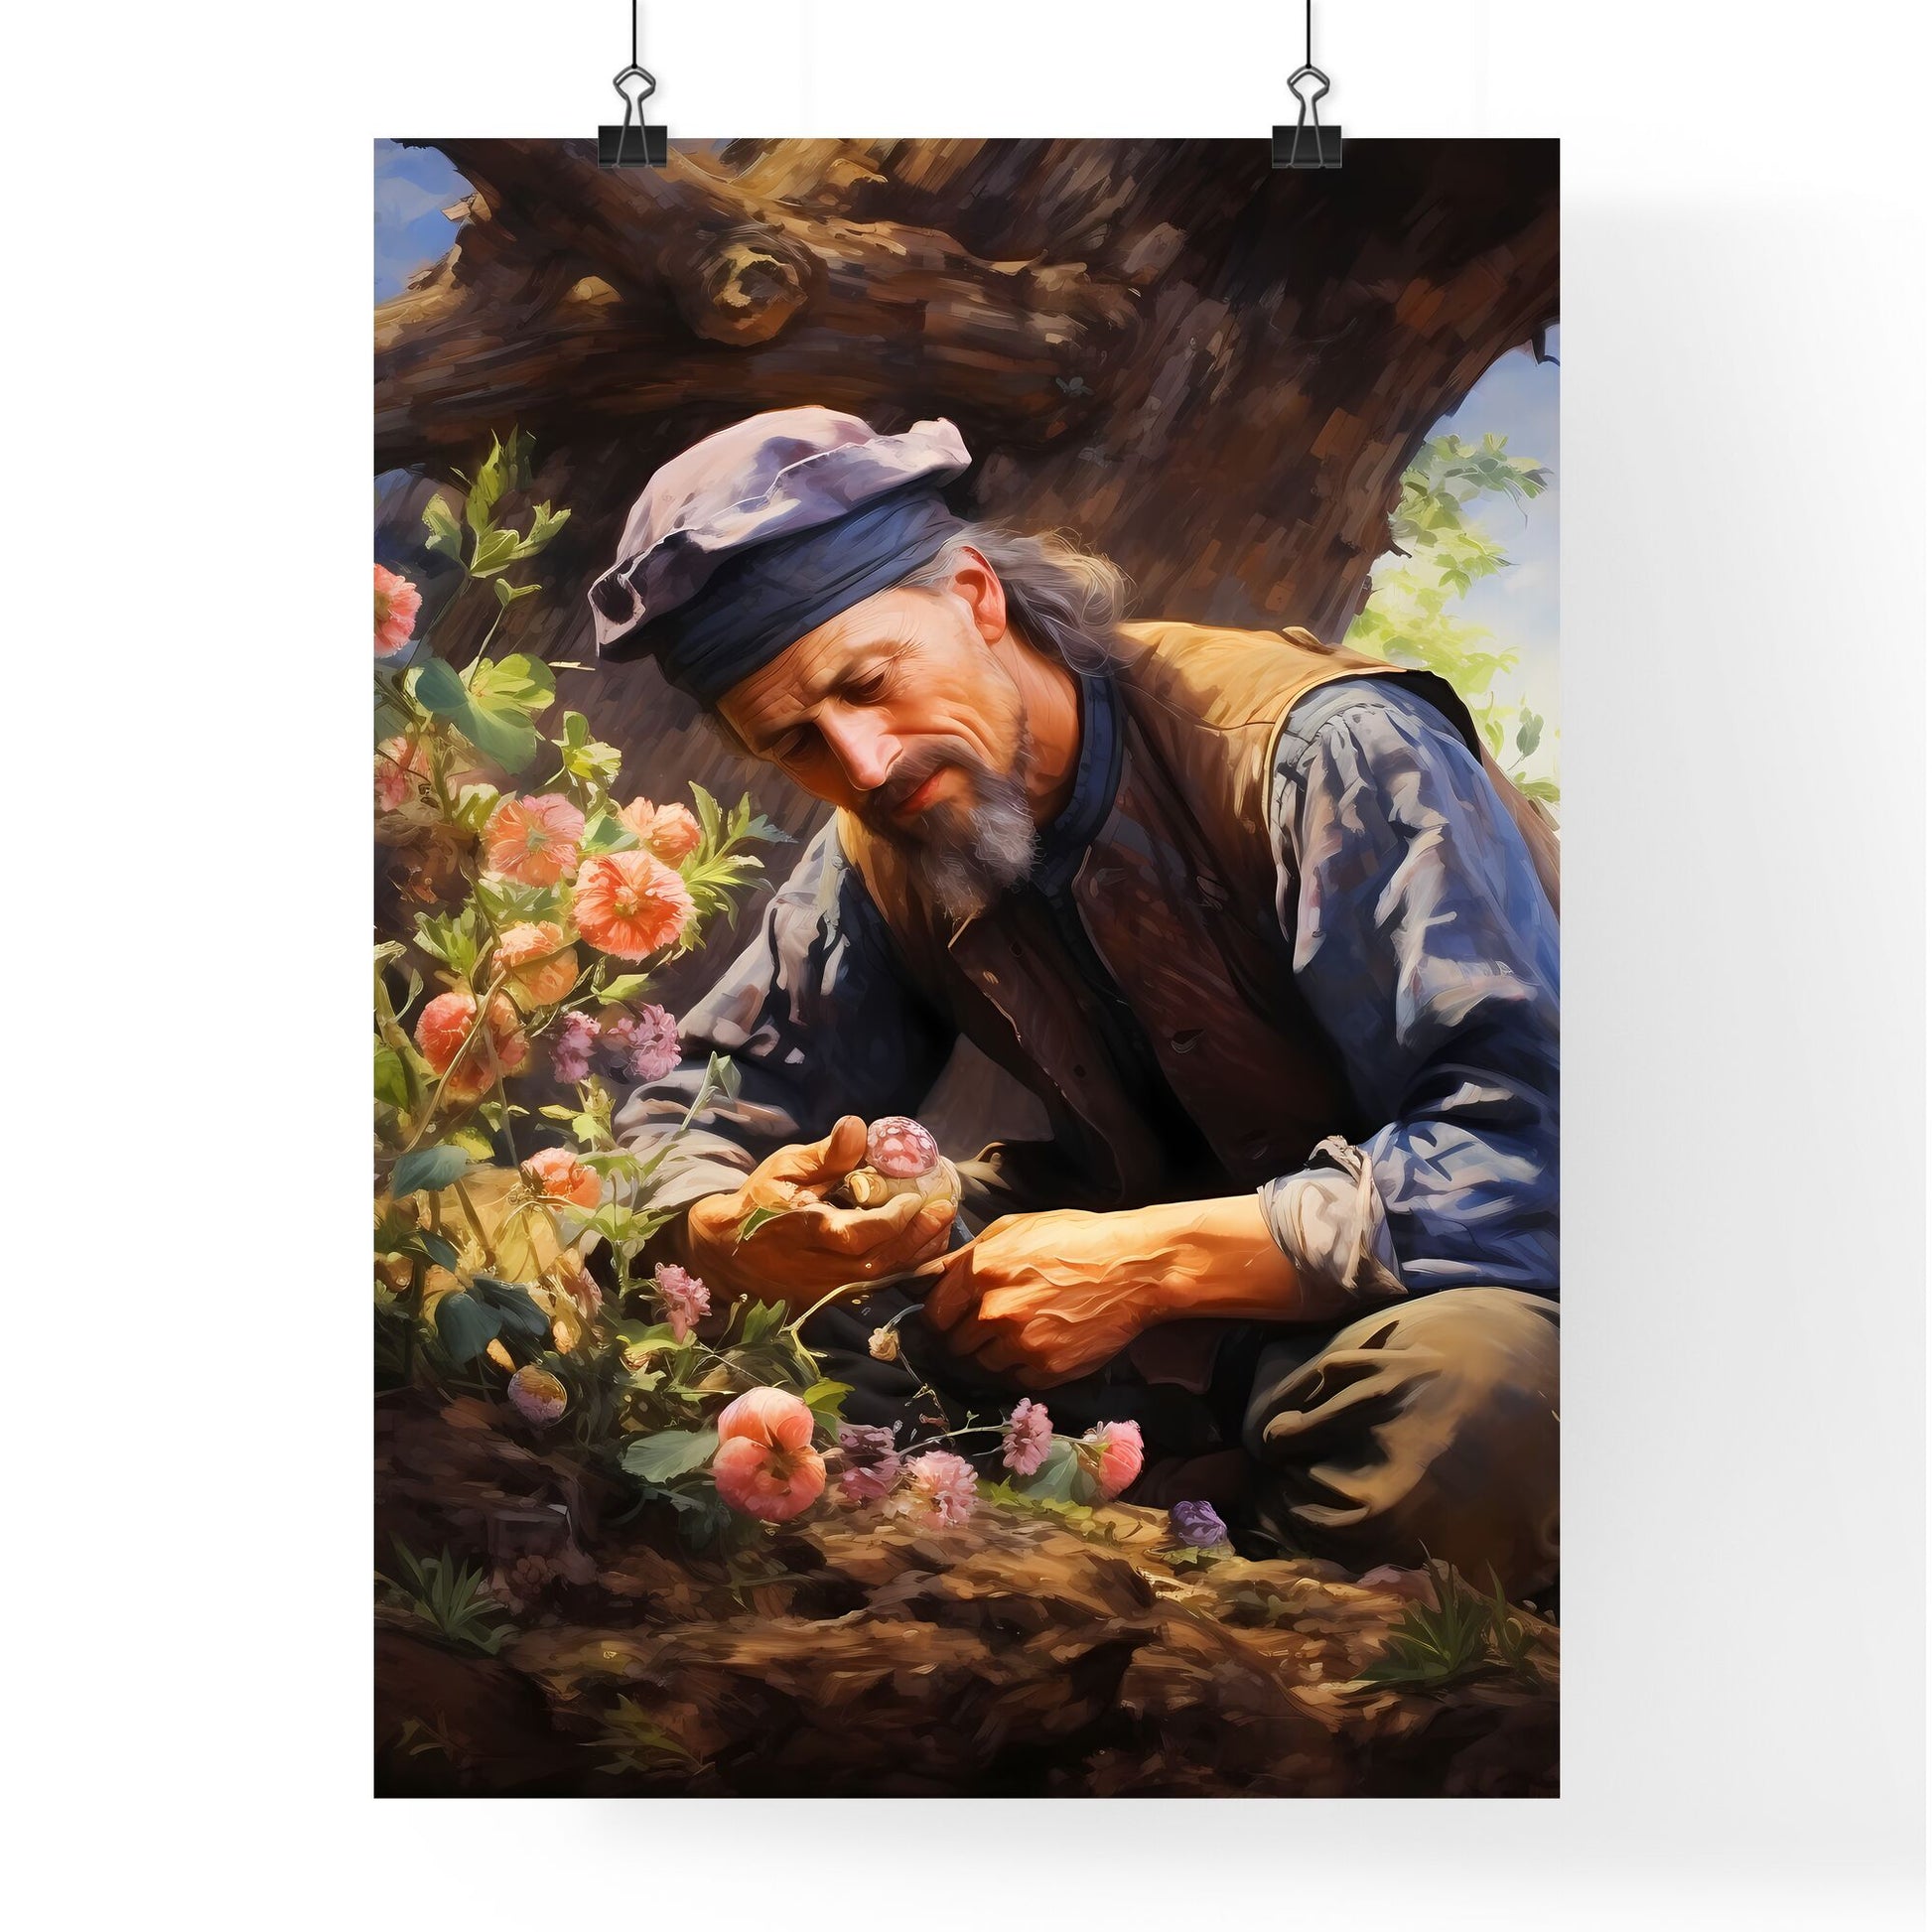 Planting An Apple Tree In The Garden - A Man Sitting Next To Flowers Default Title